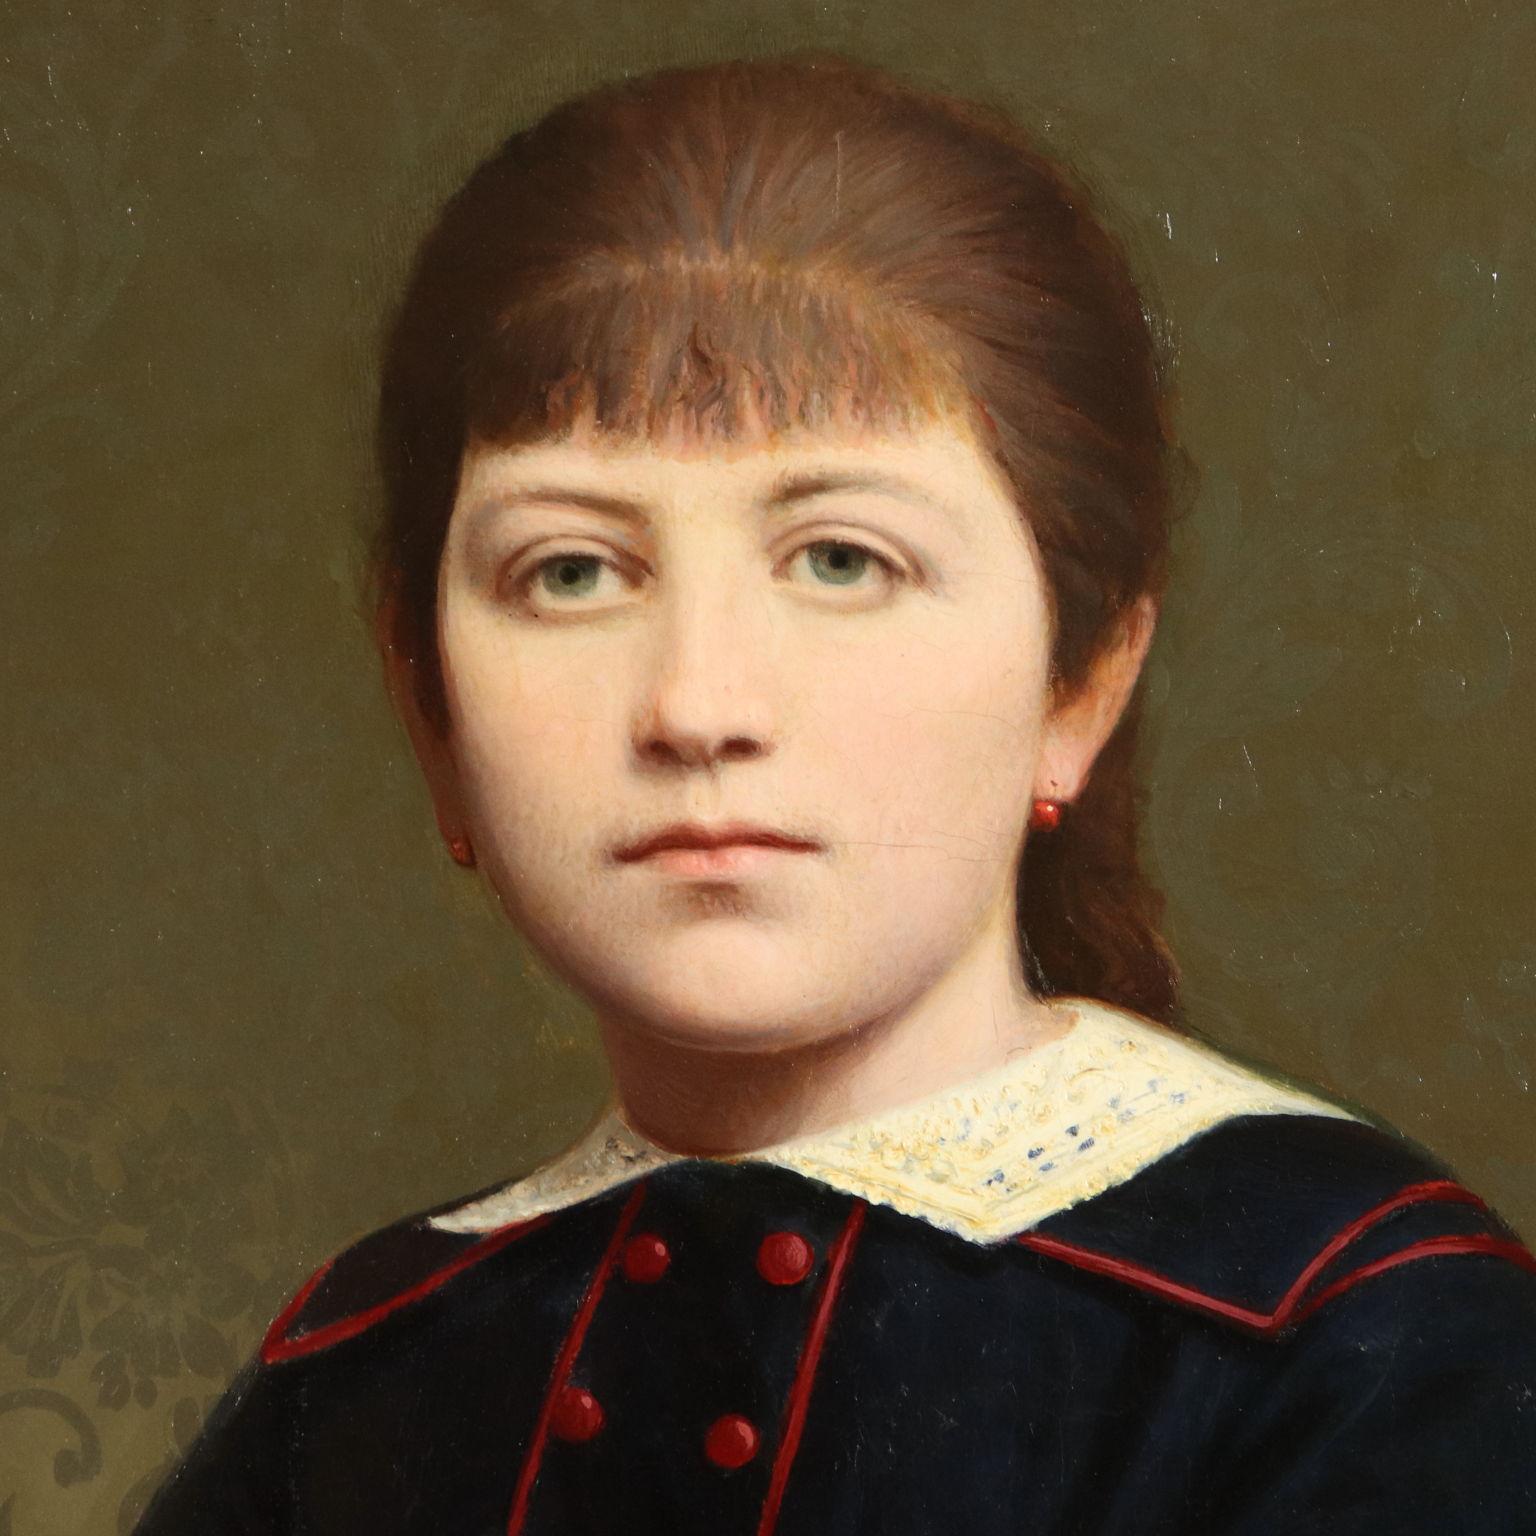 Portray of Young Girl Oil on Canvas 19th Century - Black Portrait Painting by Unknown